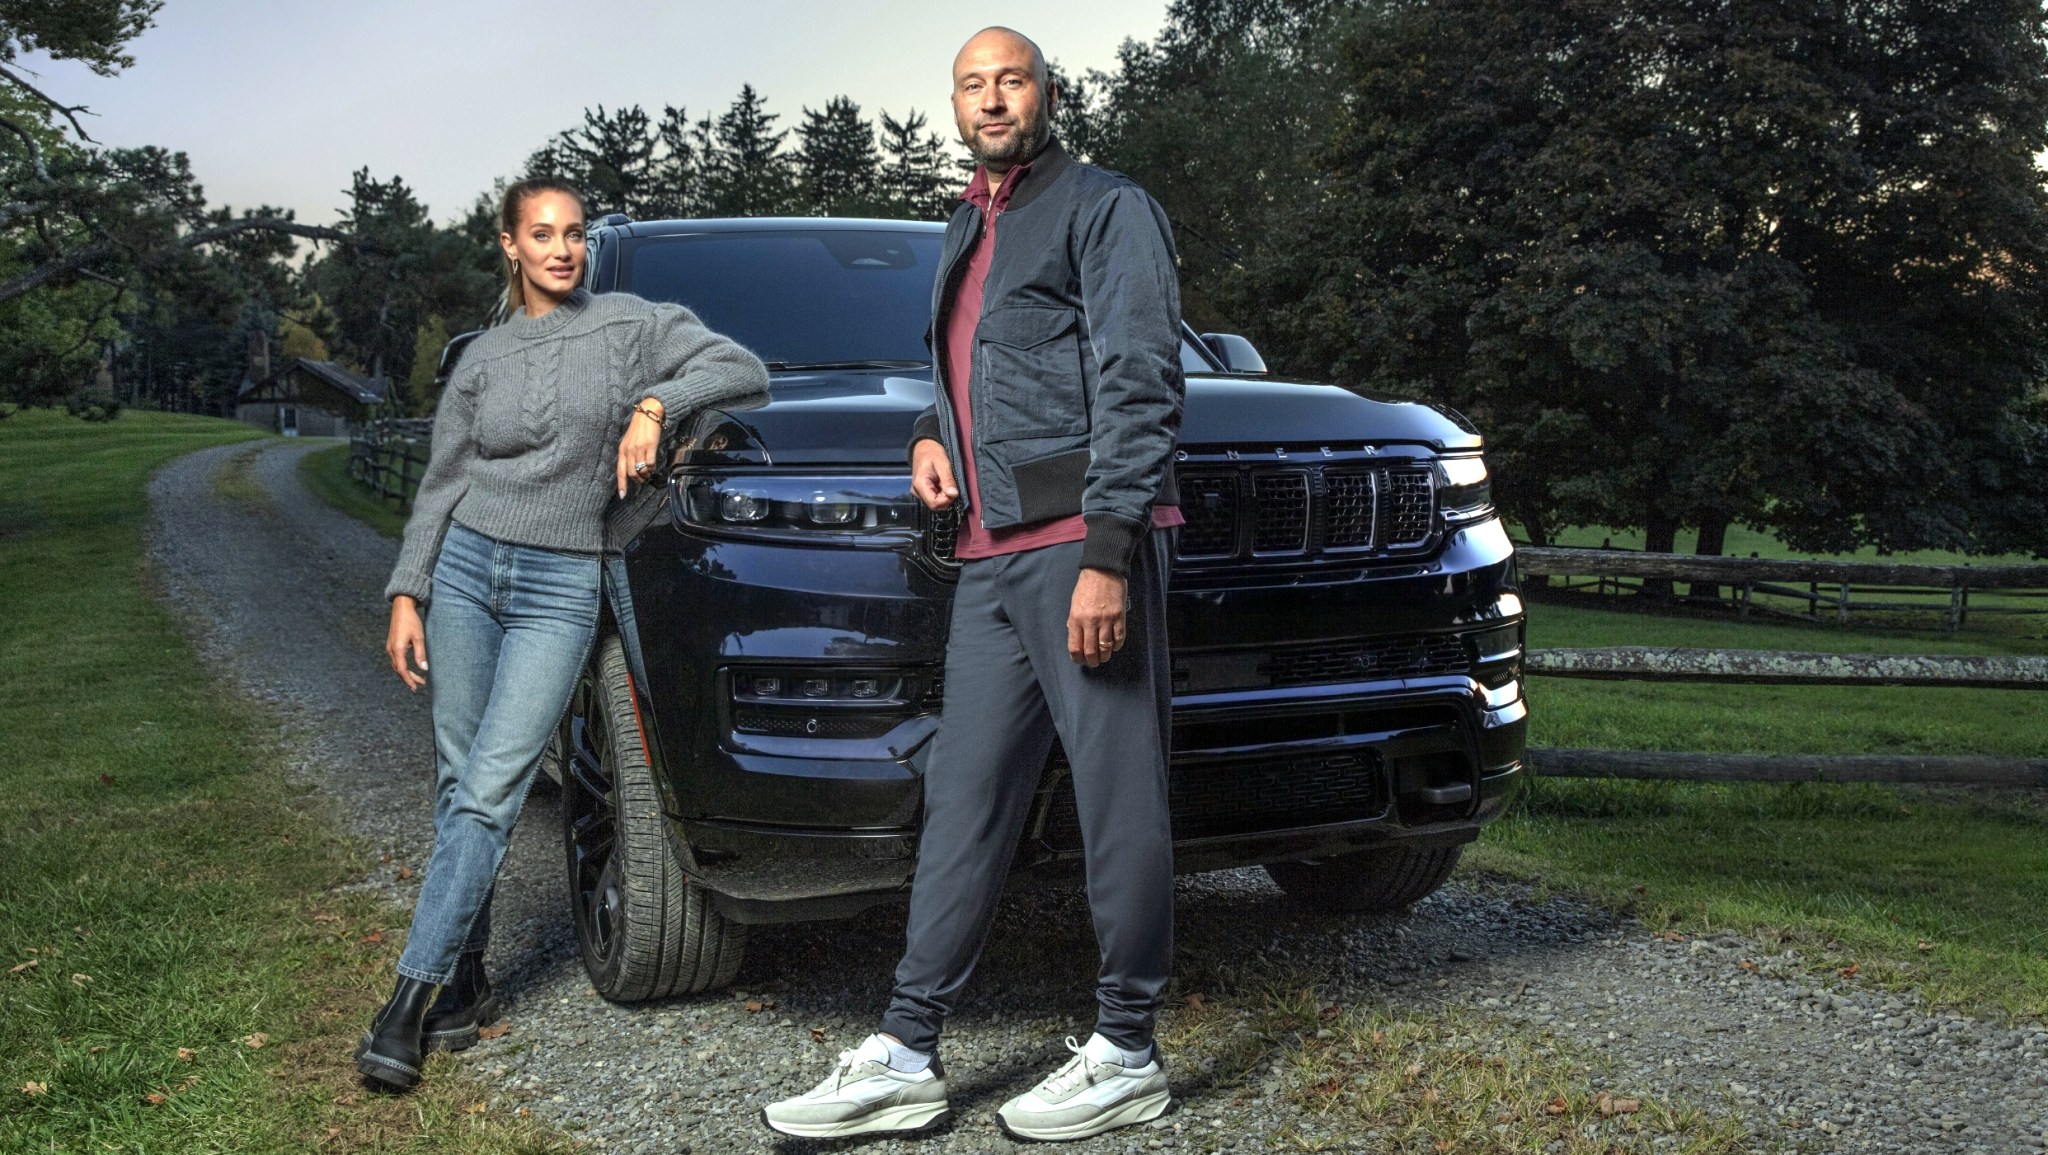 Derek-and-Hannah-Jeter-sign-long-term-partnership-with-Jeep®-for-the-Grand-Wagoneer.-Jeep-1.jpg